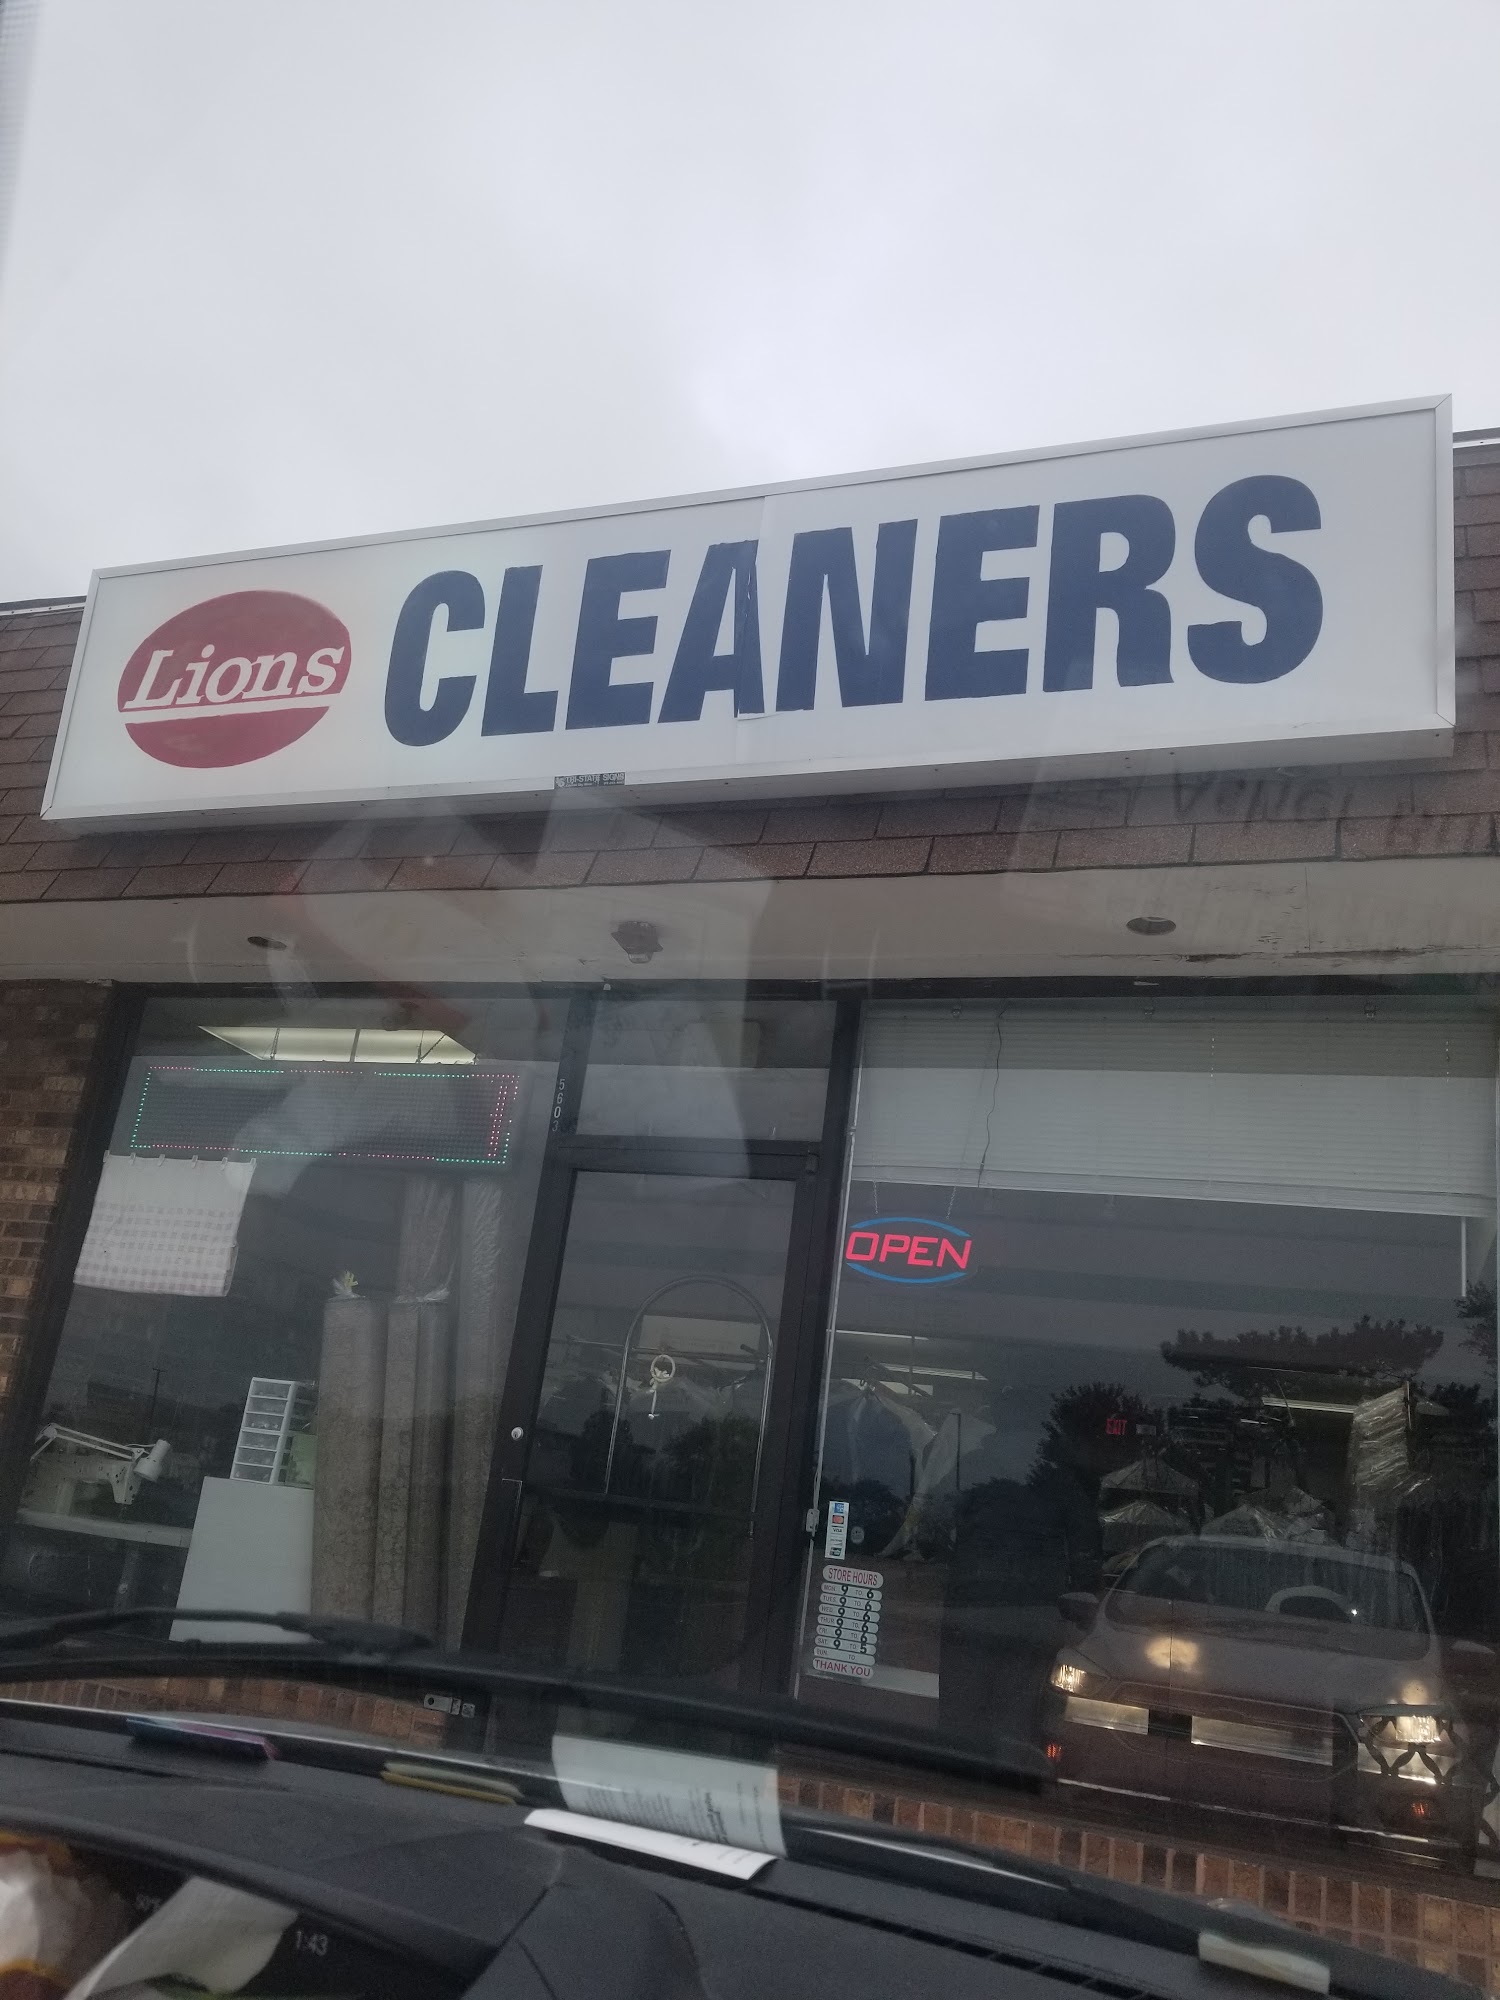 Lions Cleaners 5603 Vollmer Rd, Matteson Illinois 60443